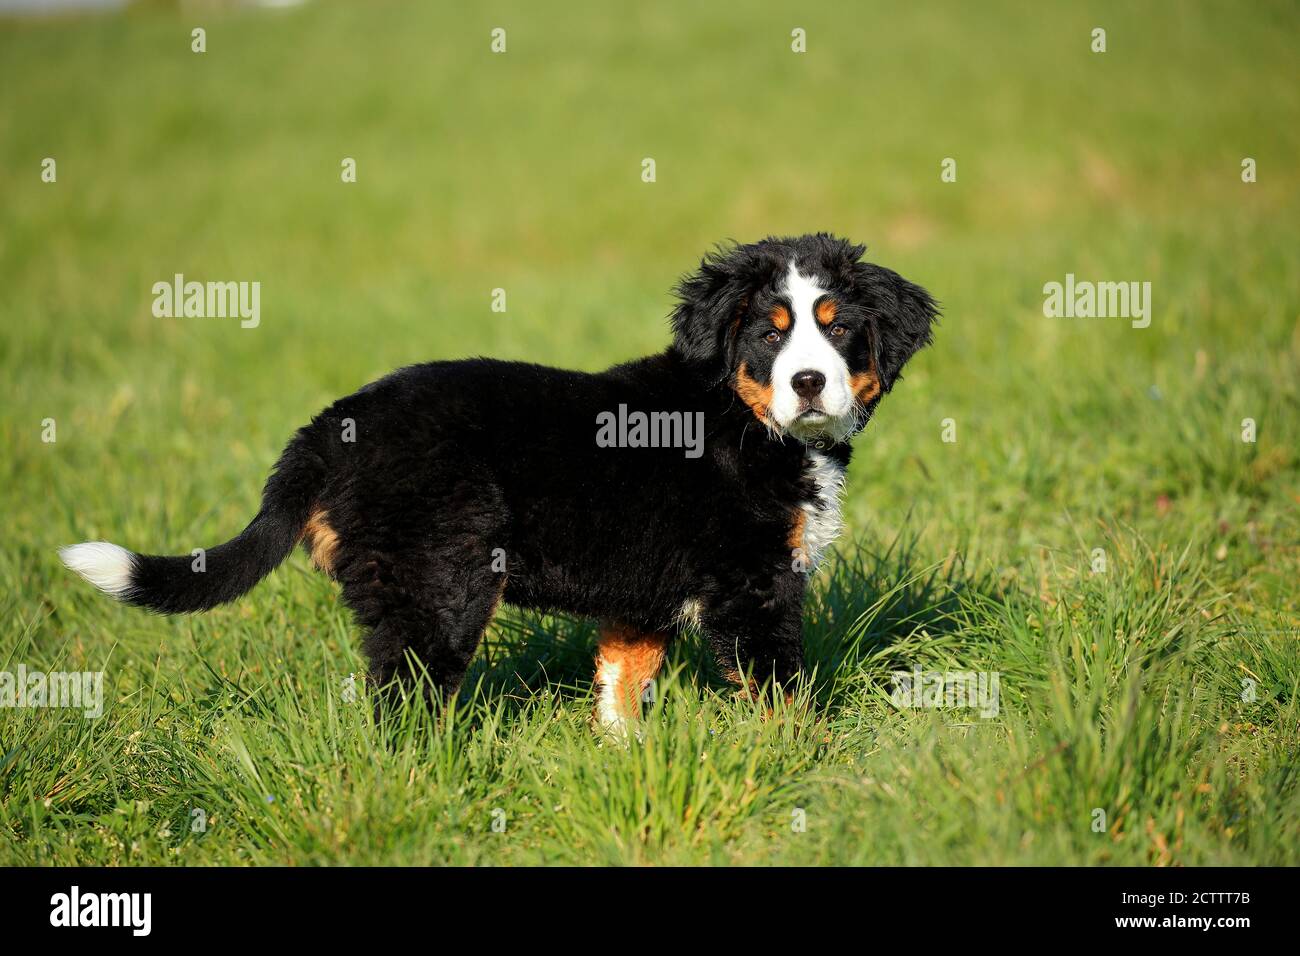 Bernese Mountain Dog. Puppy standing on grass. Stock Photo